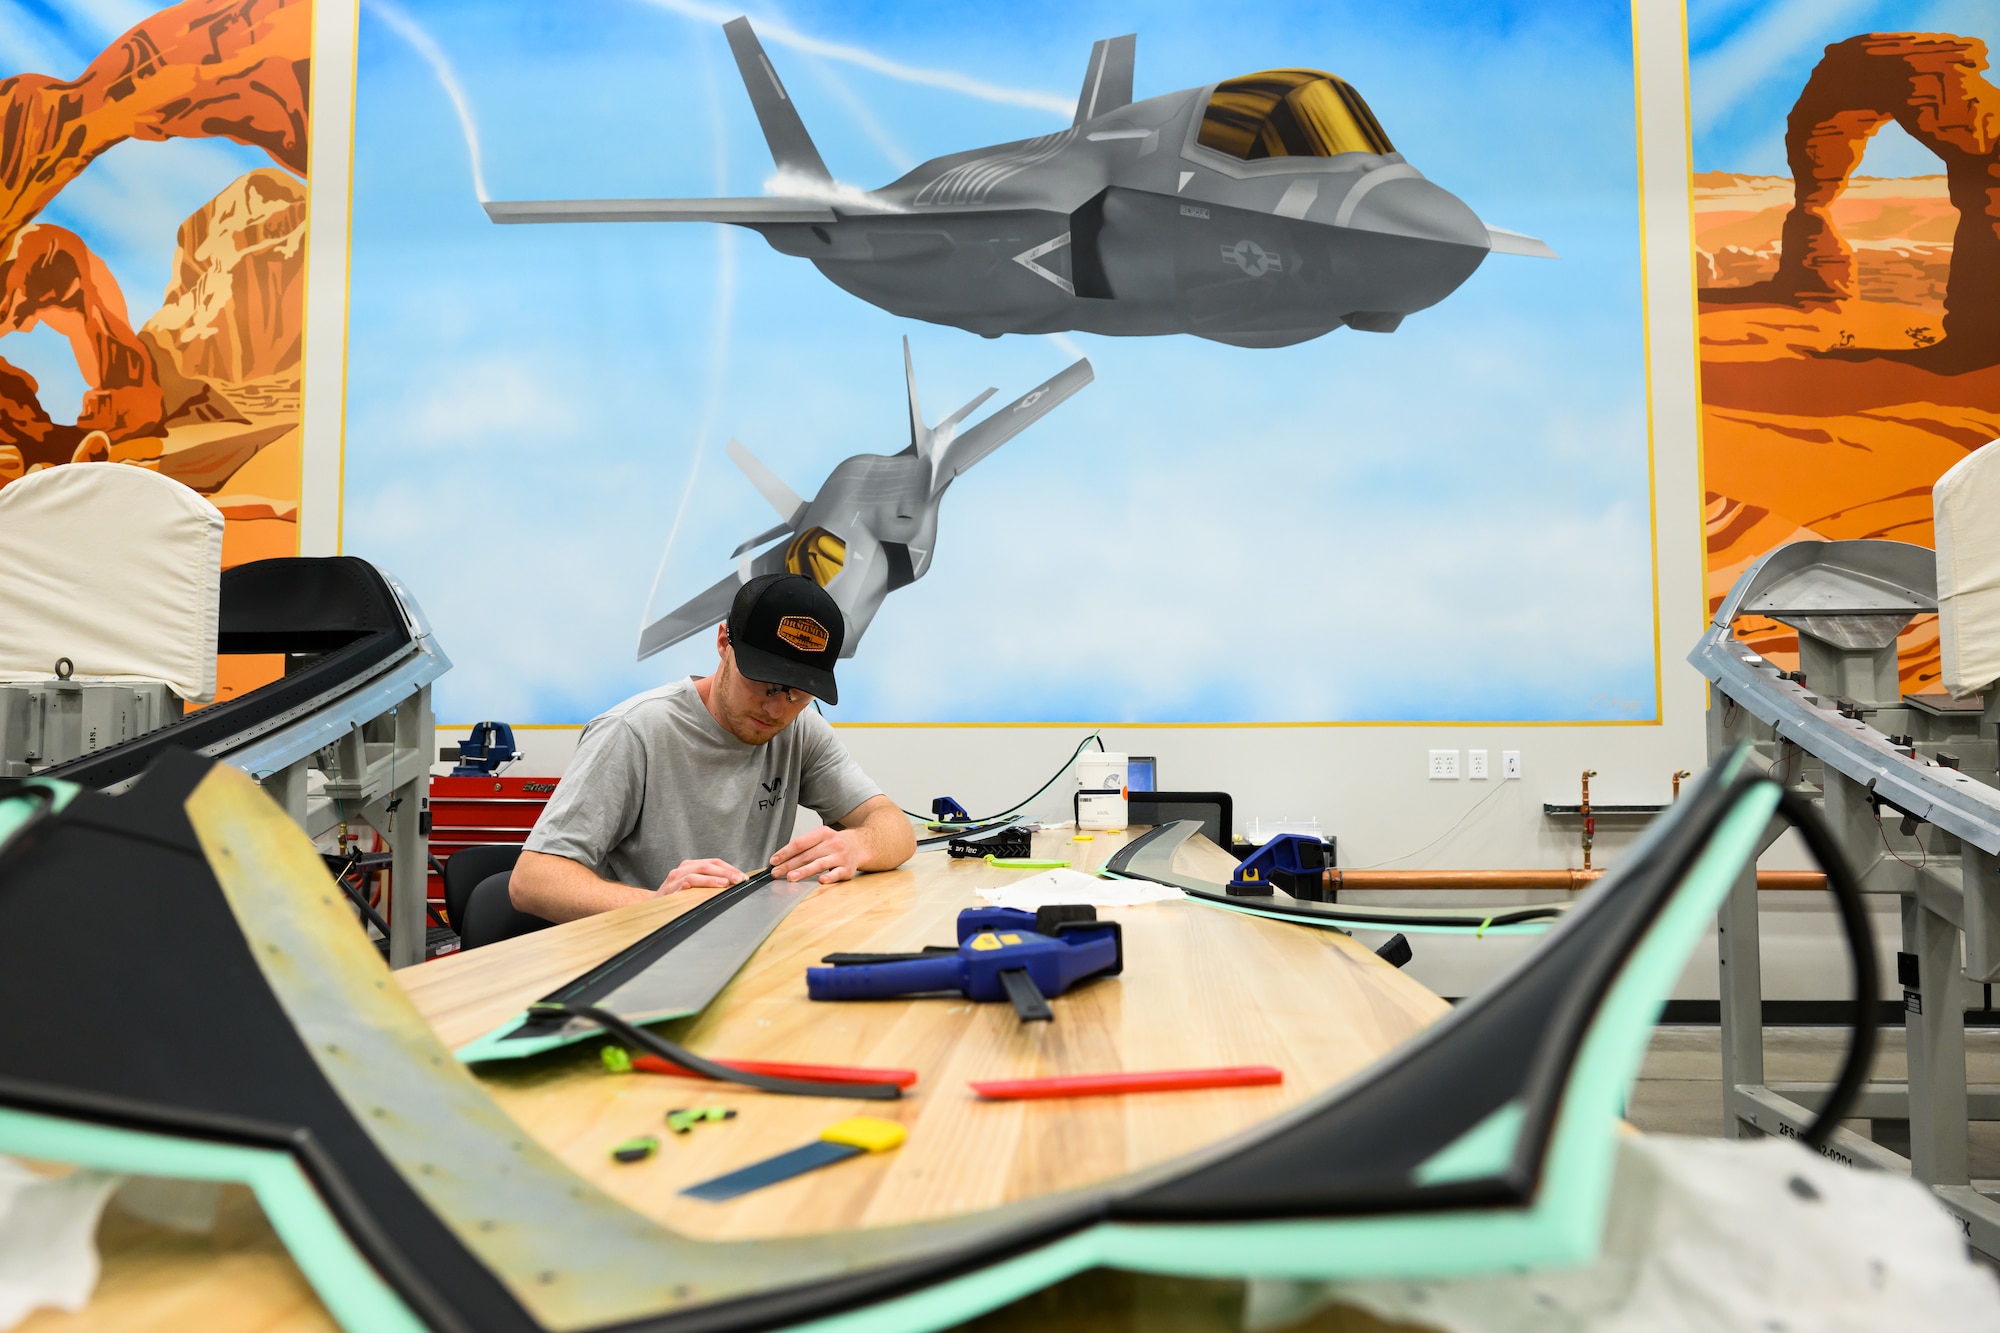 A man works on an F-35 part